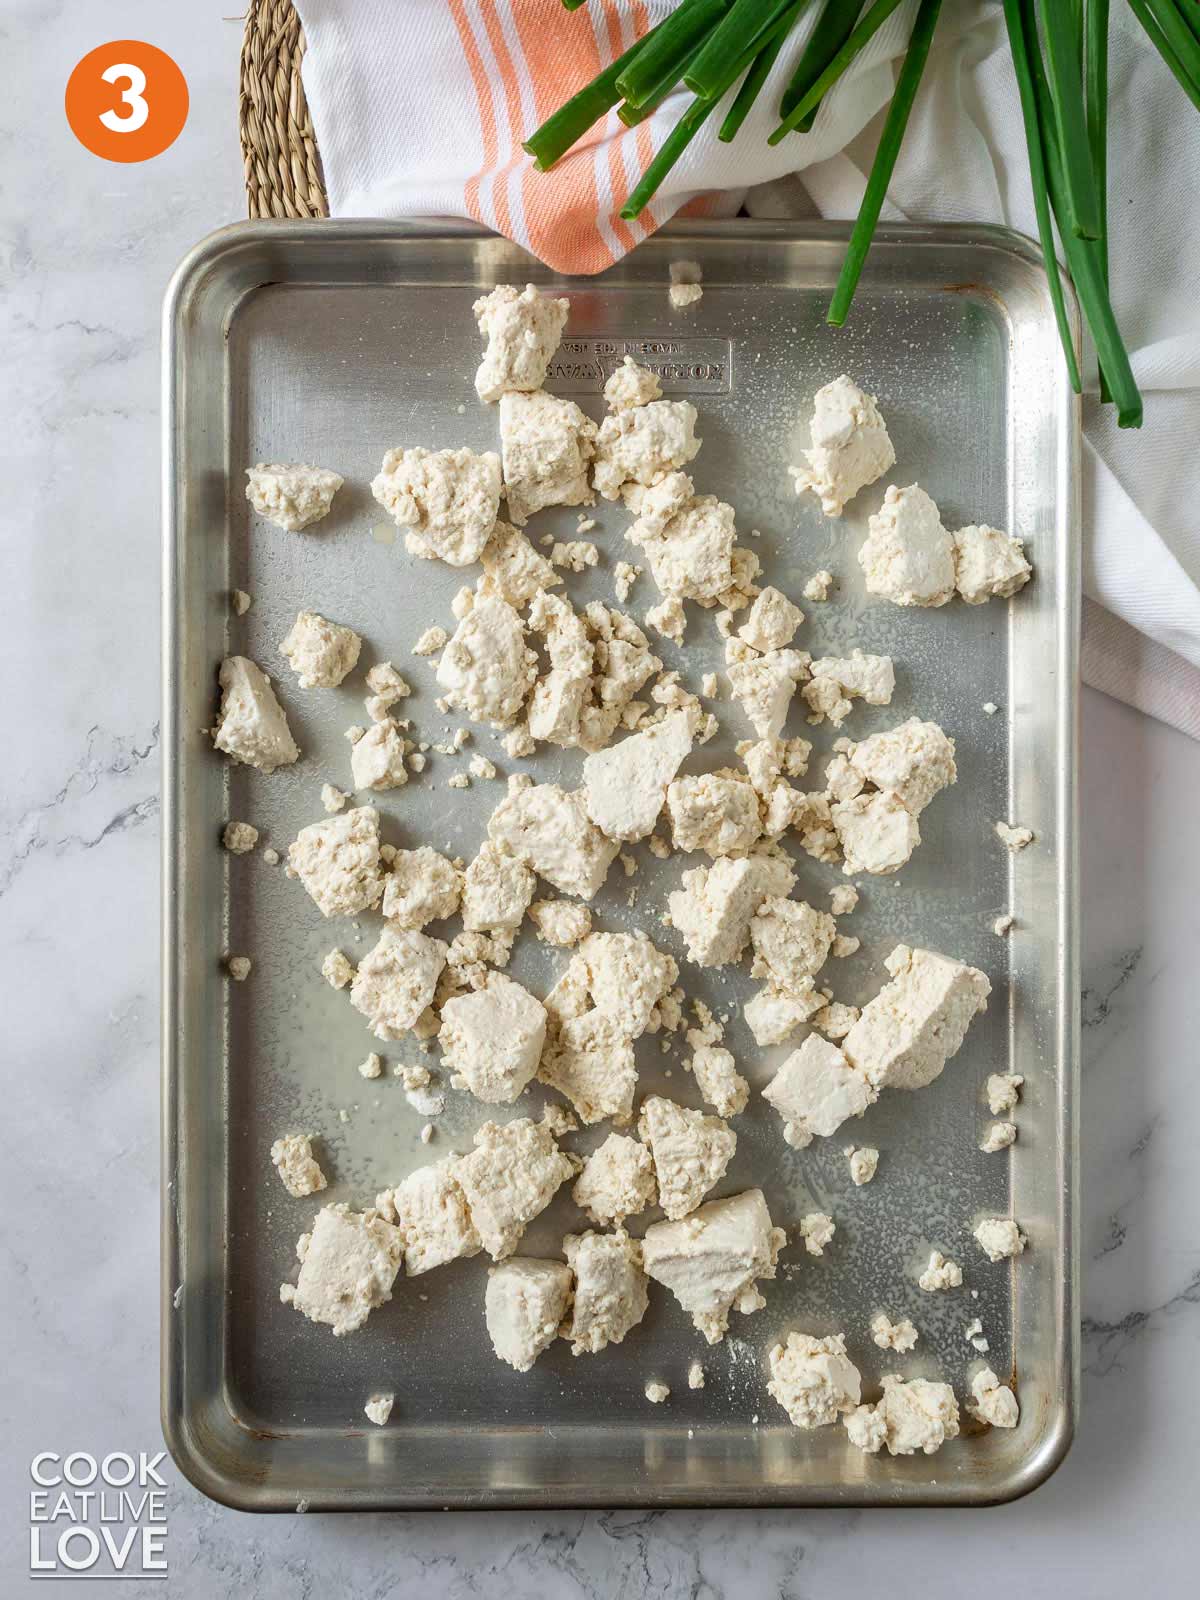 Tofu spread out on a pan to cook.